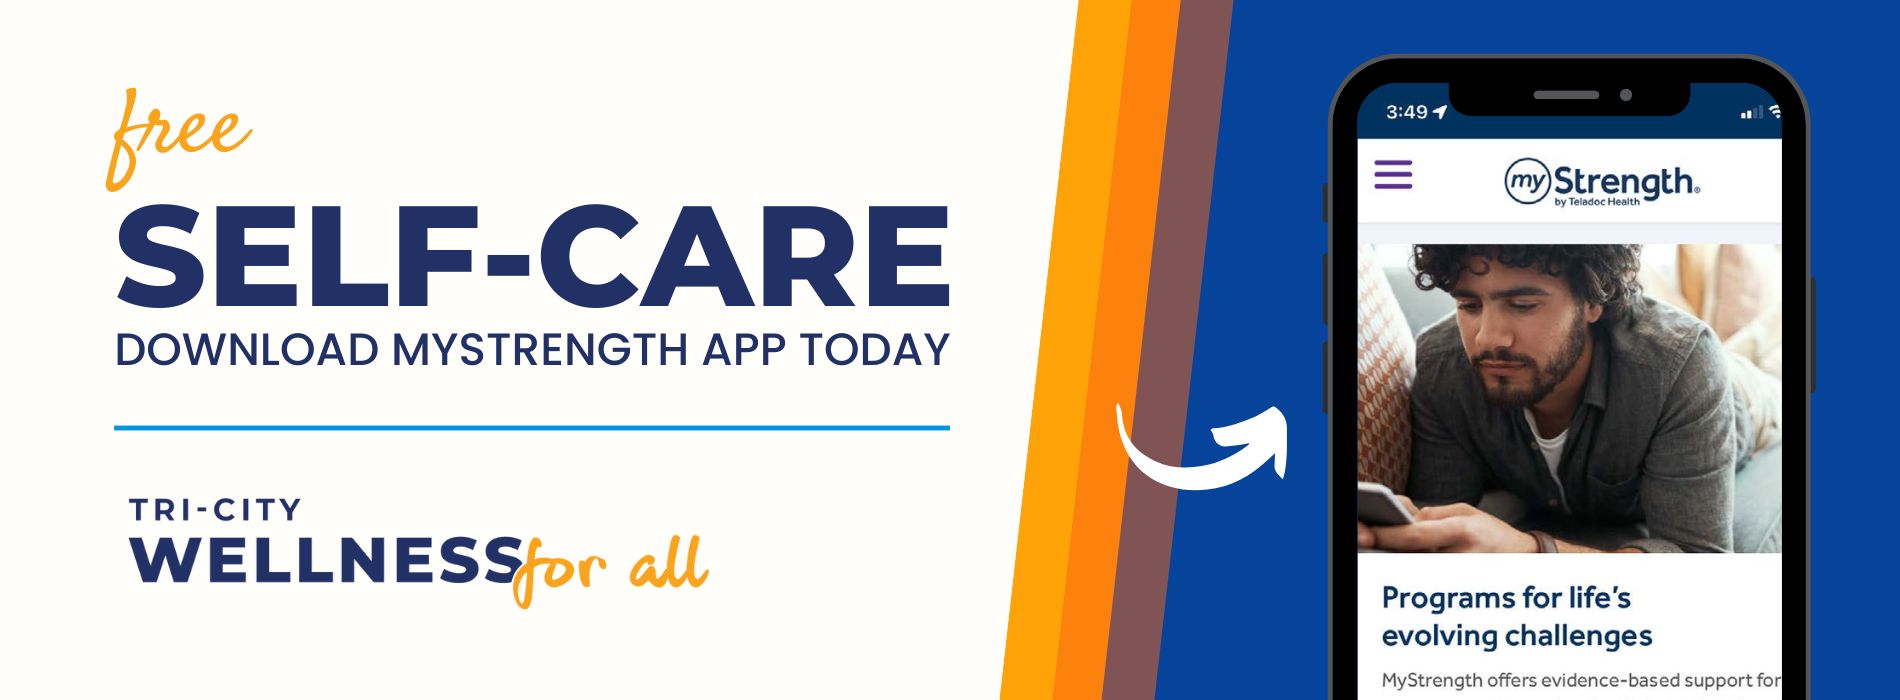 Free self-care. Download the myStrength app today. 